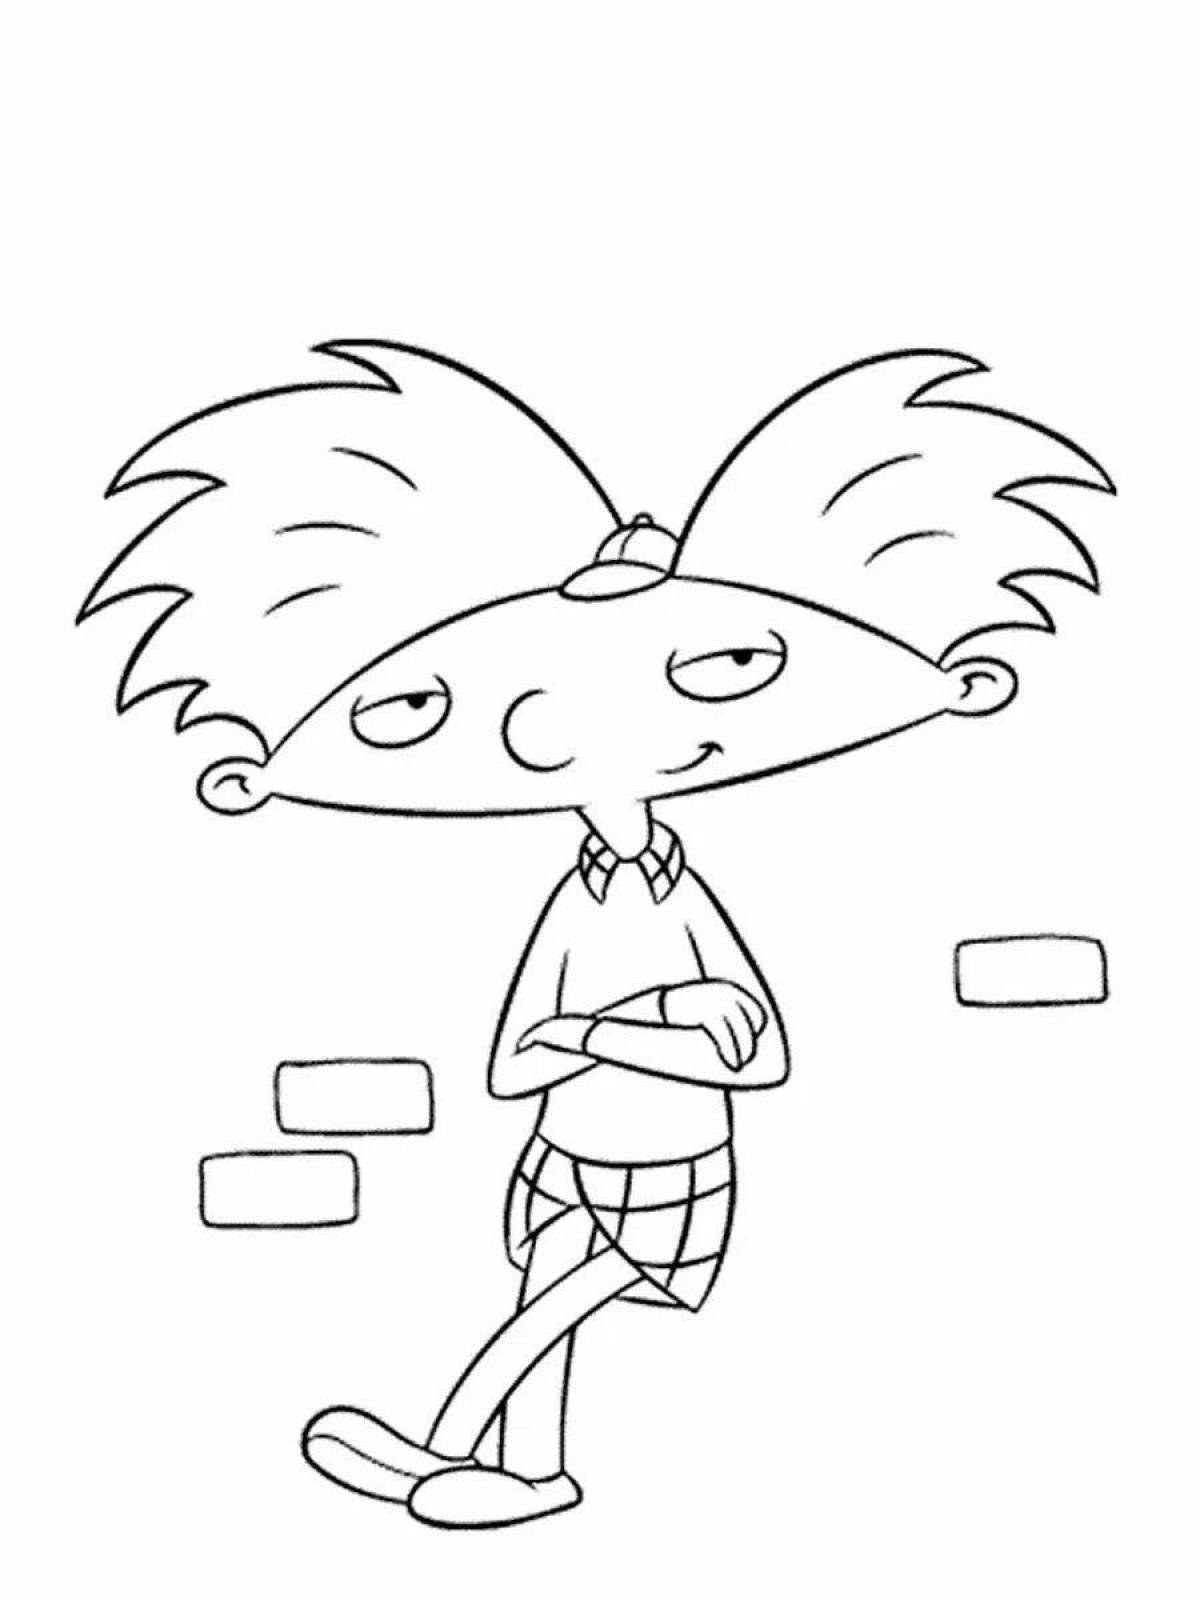 Charming hey arnold coloring book